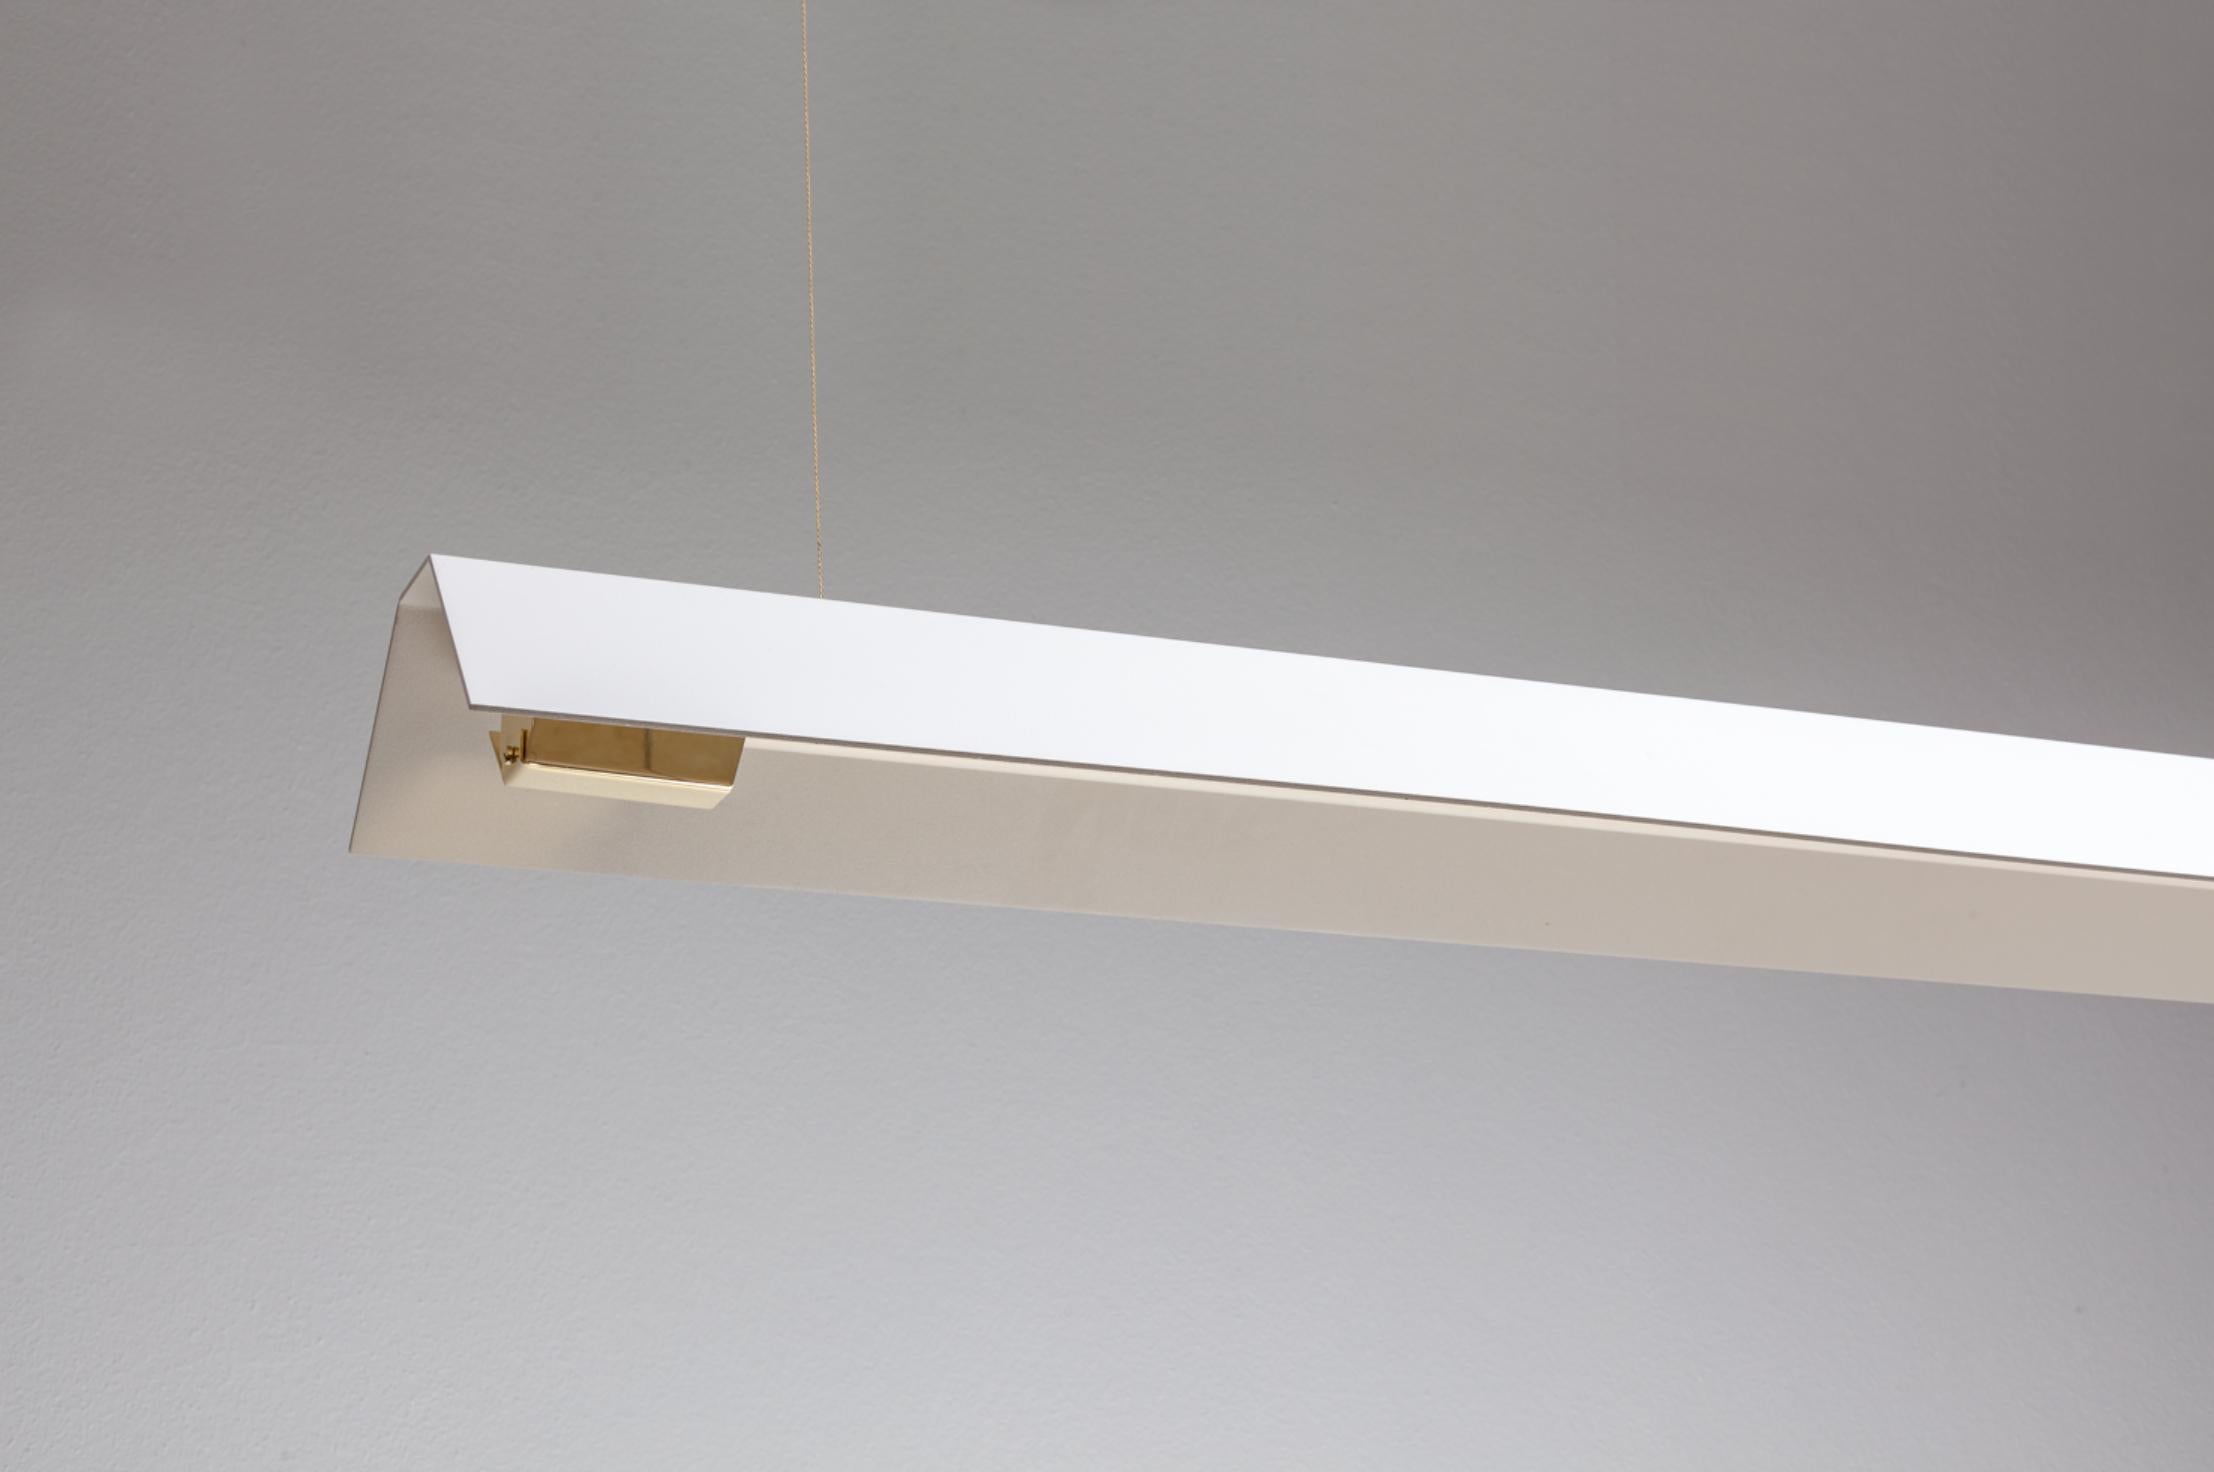 Medium Misalliance ex pure white suspended light by Lexavala.
Dimensions: D 16 x W 100 x H 8 cm.
Materials: Powder coated shade with details made of brass or stainless steel.

There are two lenghts of socket covers, extending over the LED. Two